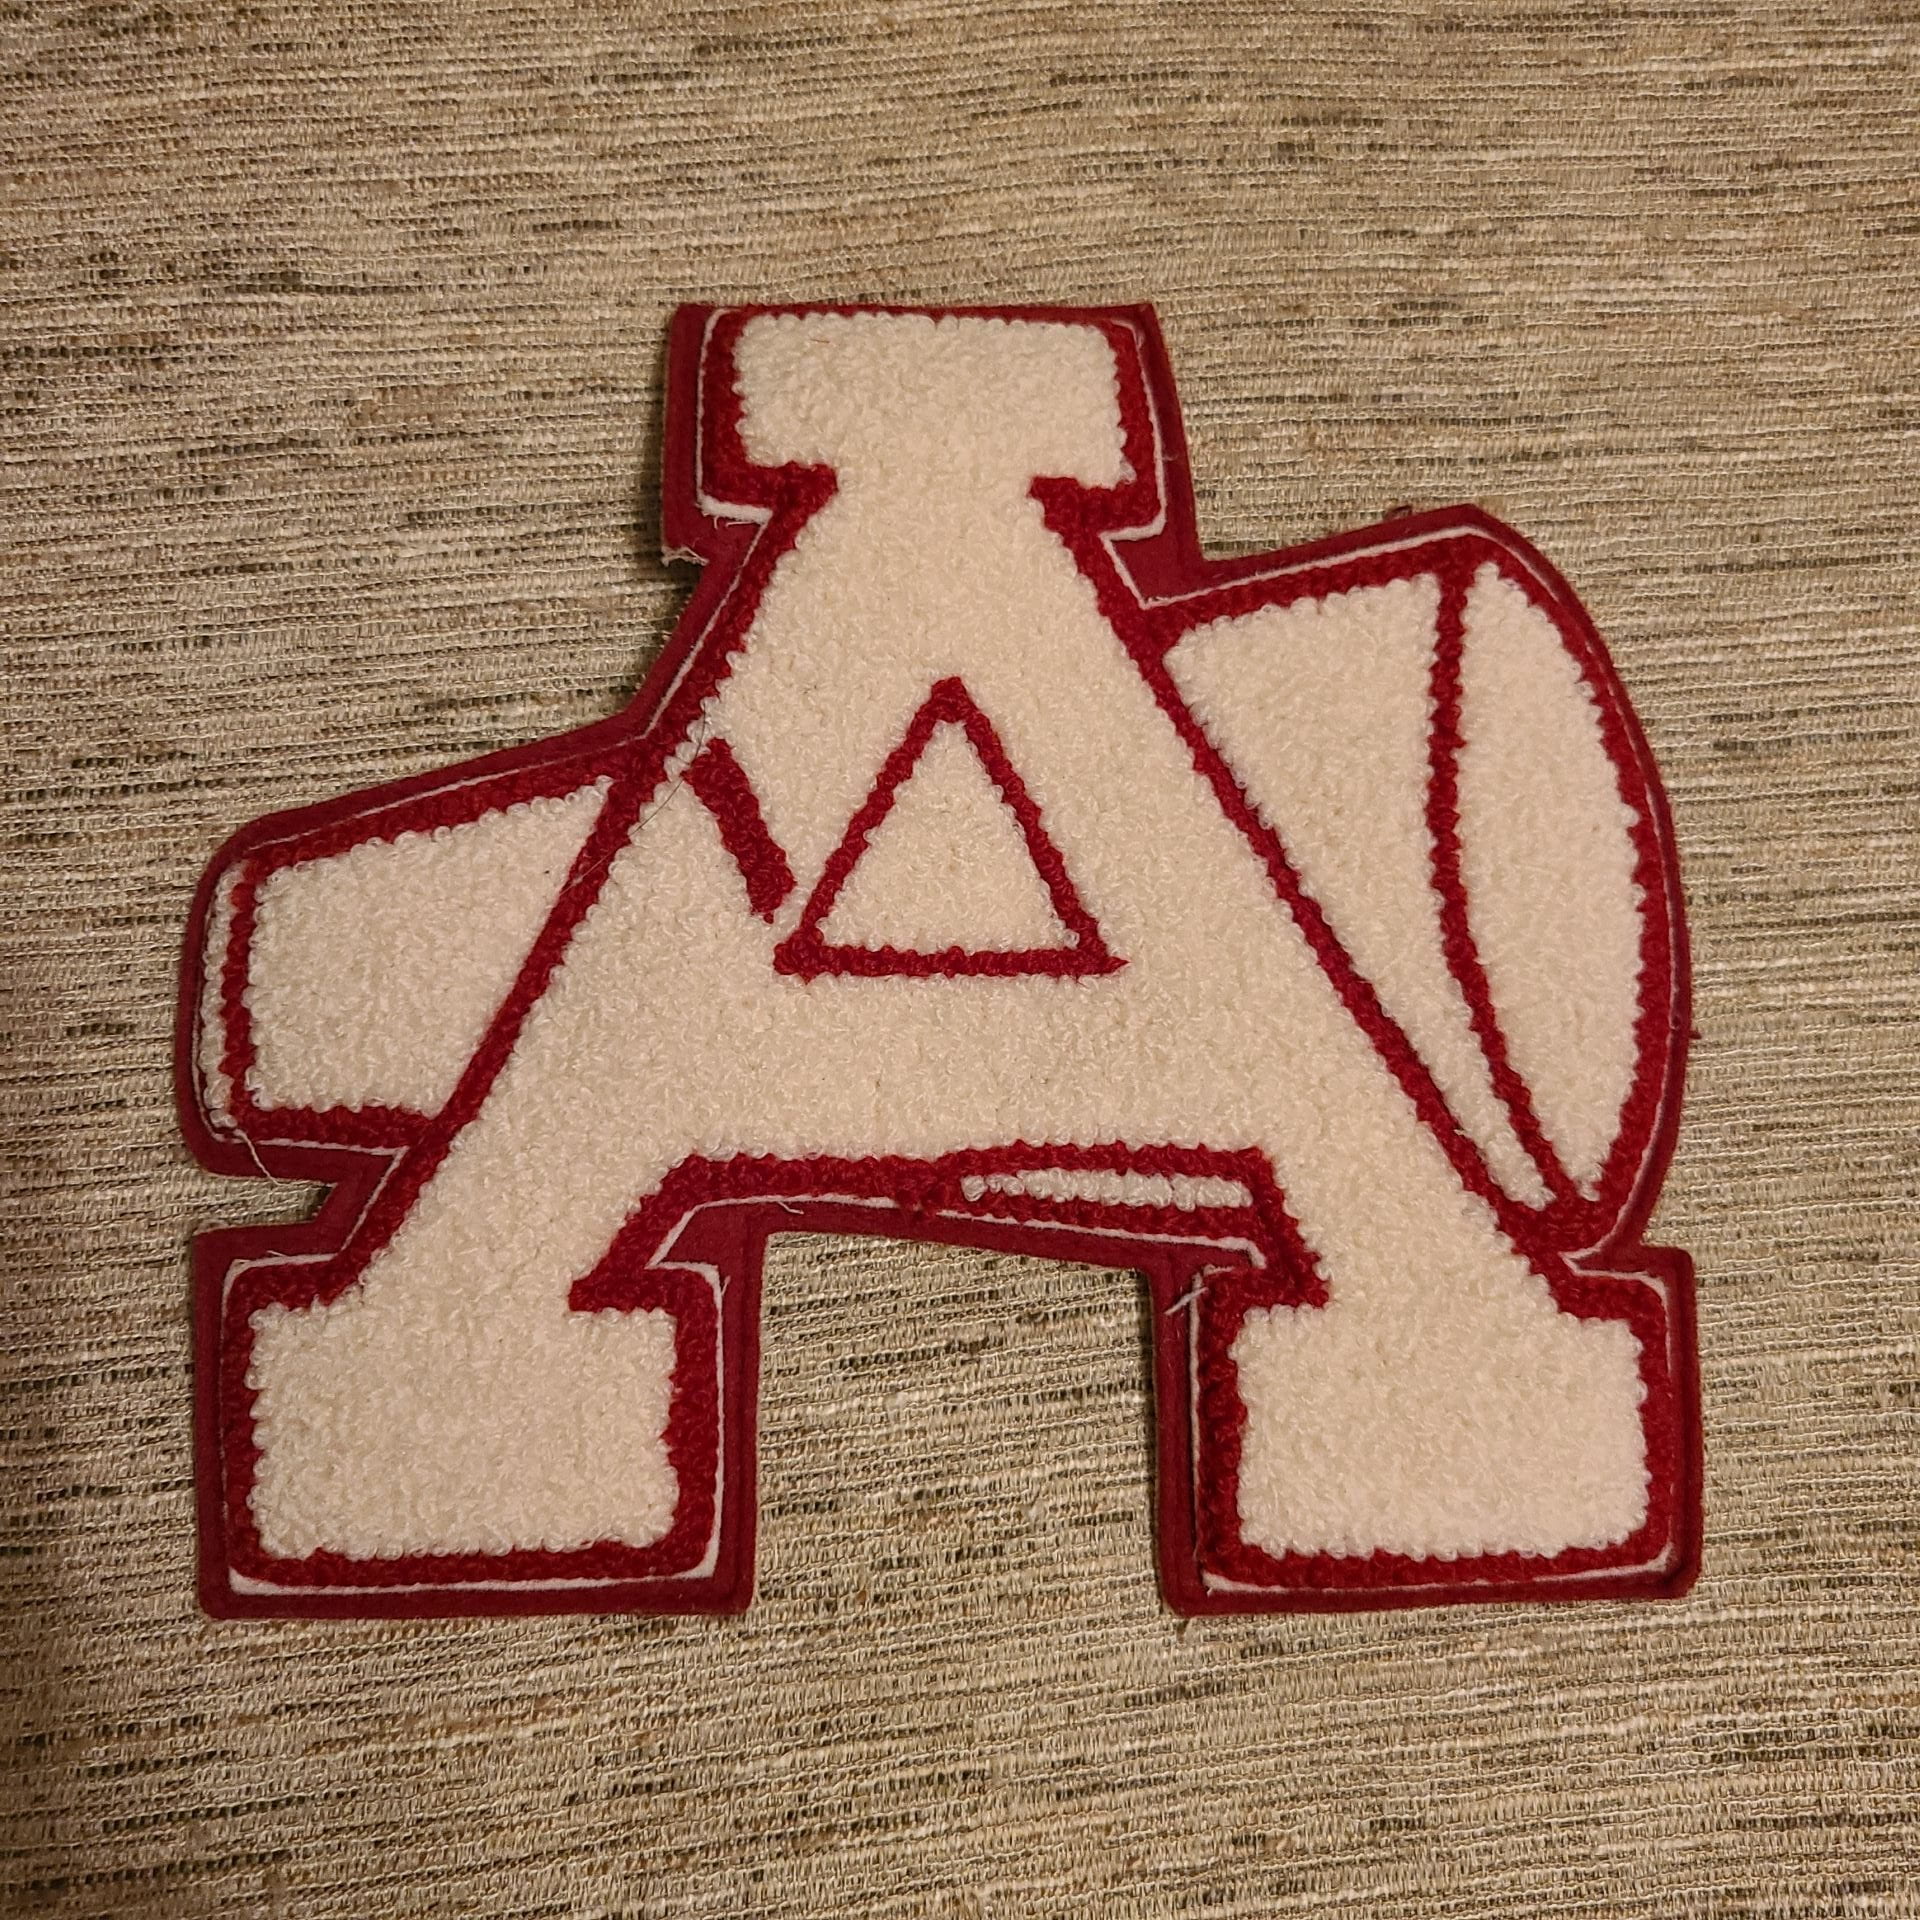 A white cheerleading letter "A" with a cheer horn behind it. The letter is outlined in red.